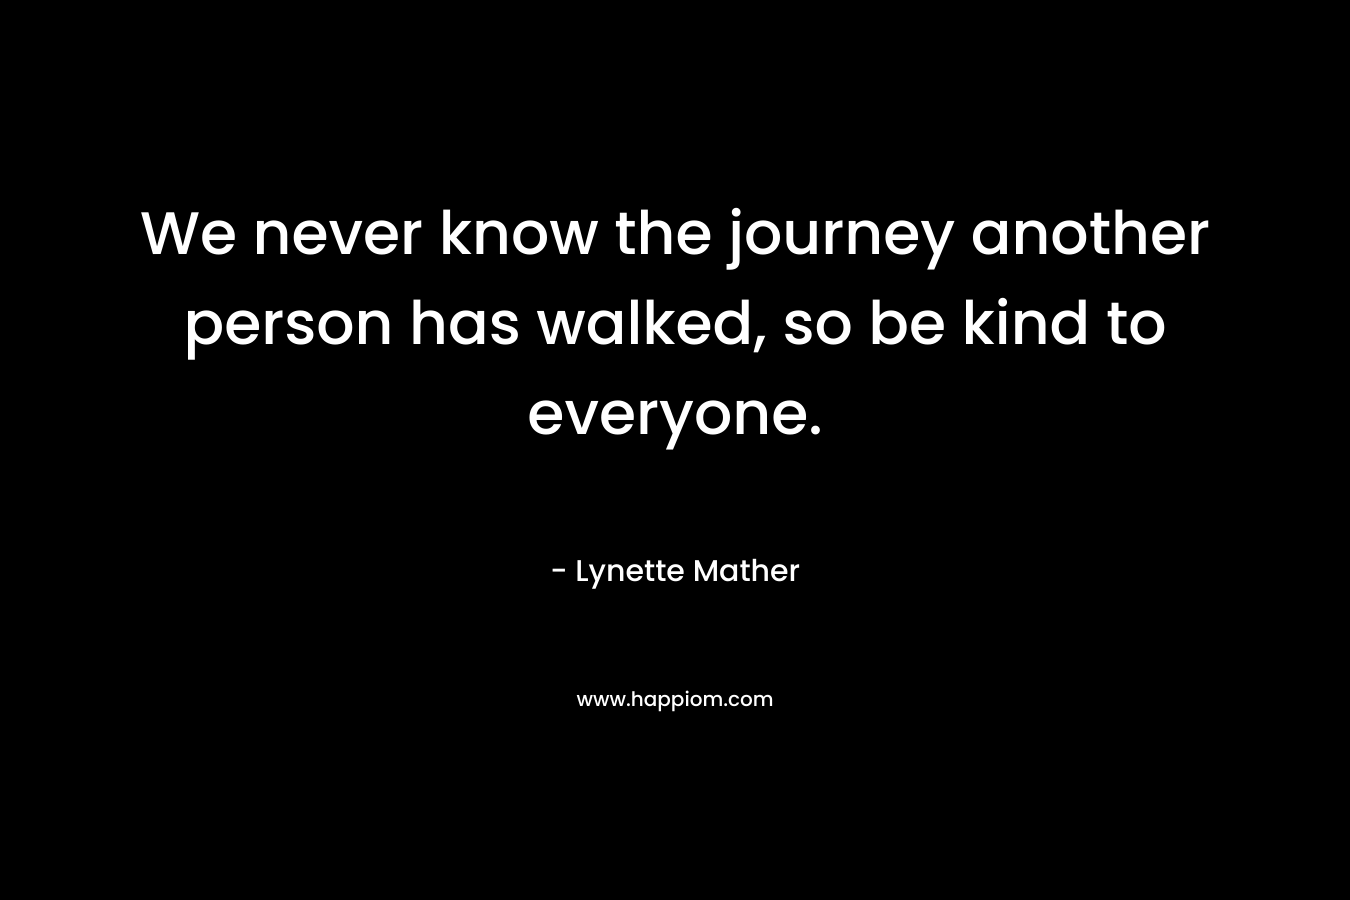 We never know the journey another person has walked, so be kind to everyone.